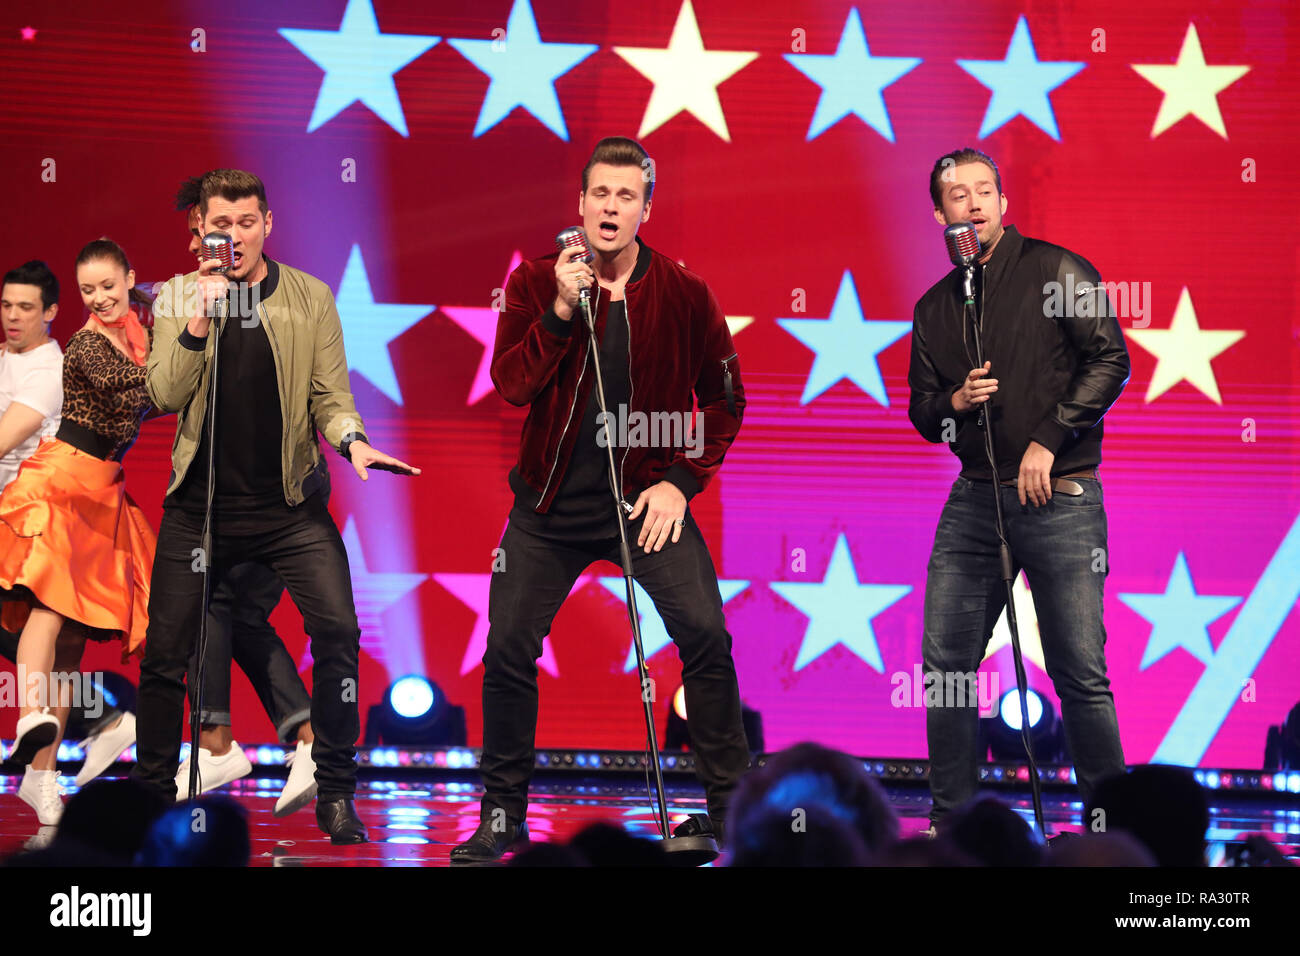 pastel brugervejledning Ødelæggelse Linz, Austria. 30th Dec, 2018. Music group The Baseballs performs during the  dress rehearsal of the ARD show Silvester Show. The programme will be  broadcast live on ARD and ORF on 31.12.2018.